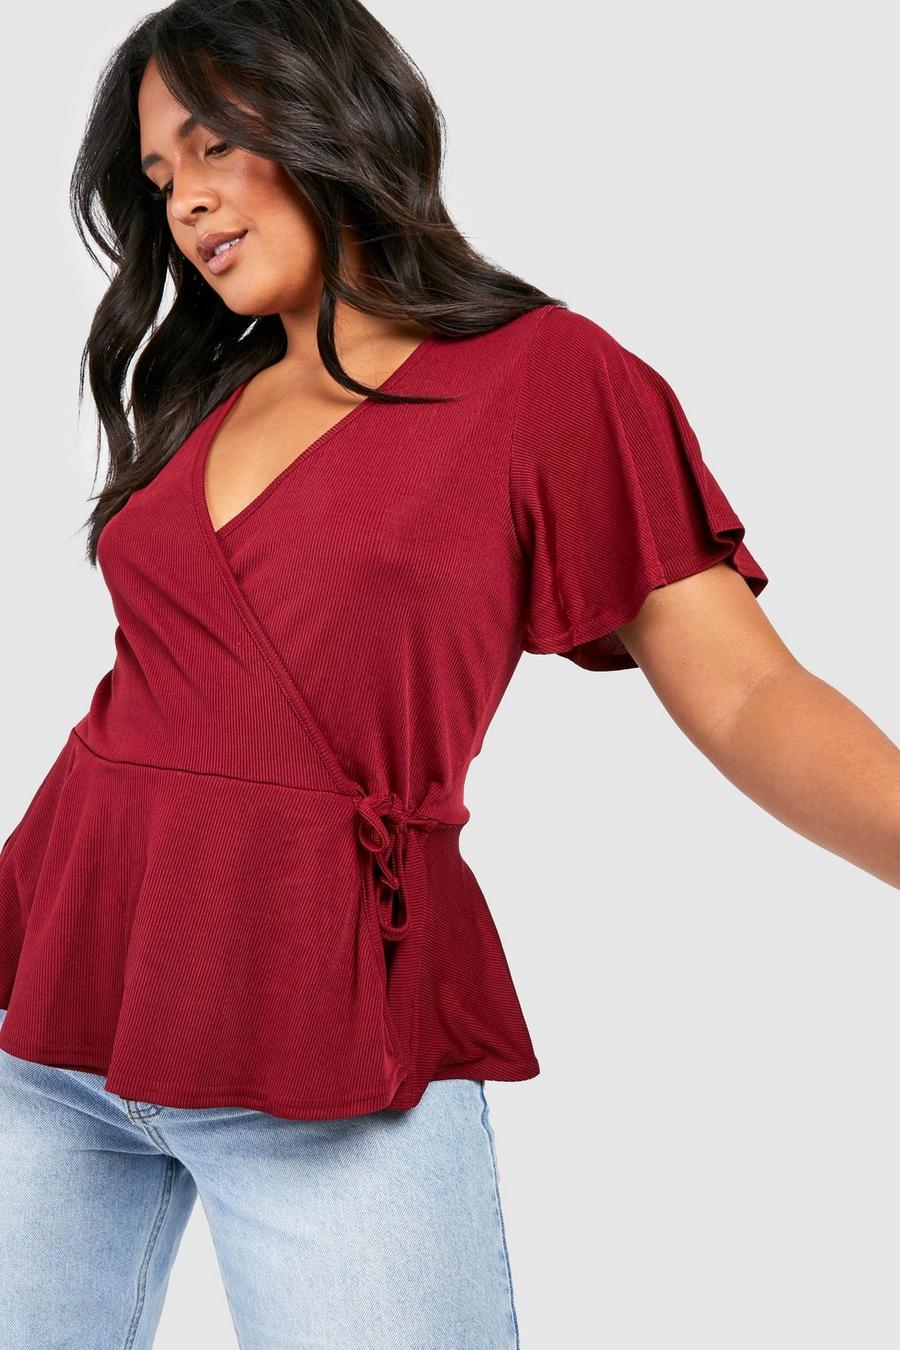 Wrap Tops, Wrap Blouses & Cross Over Tops